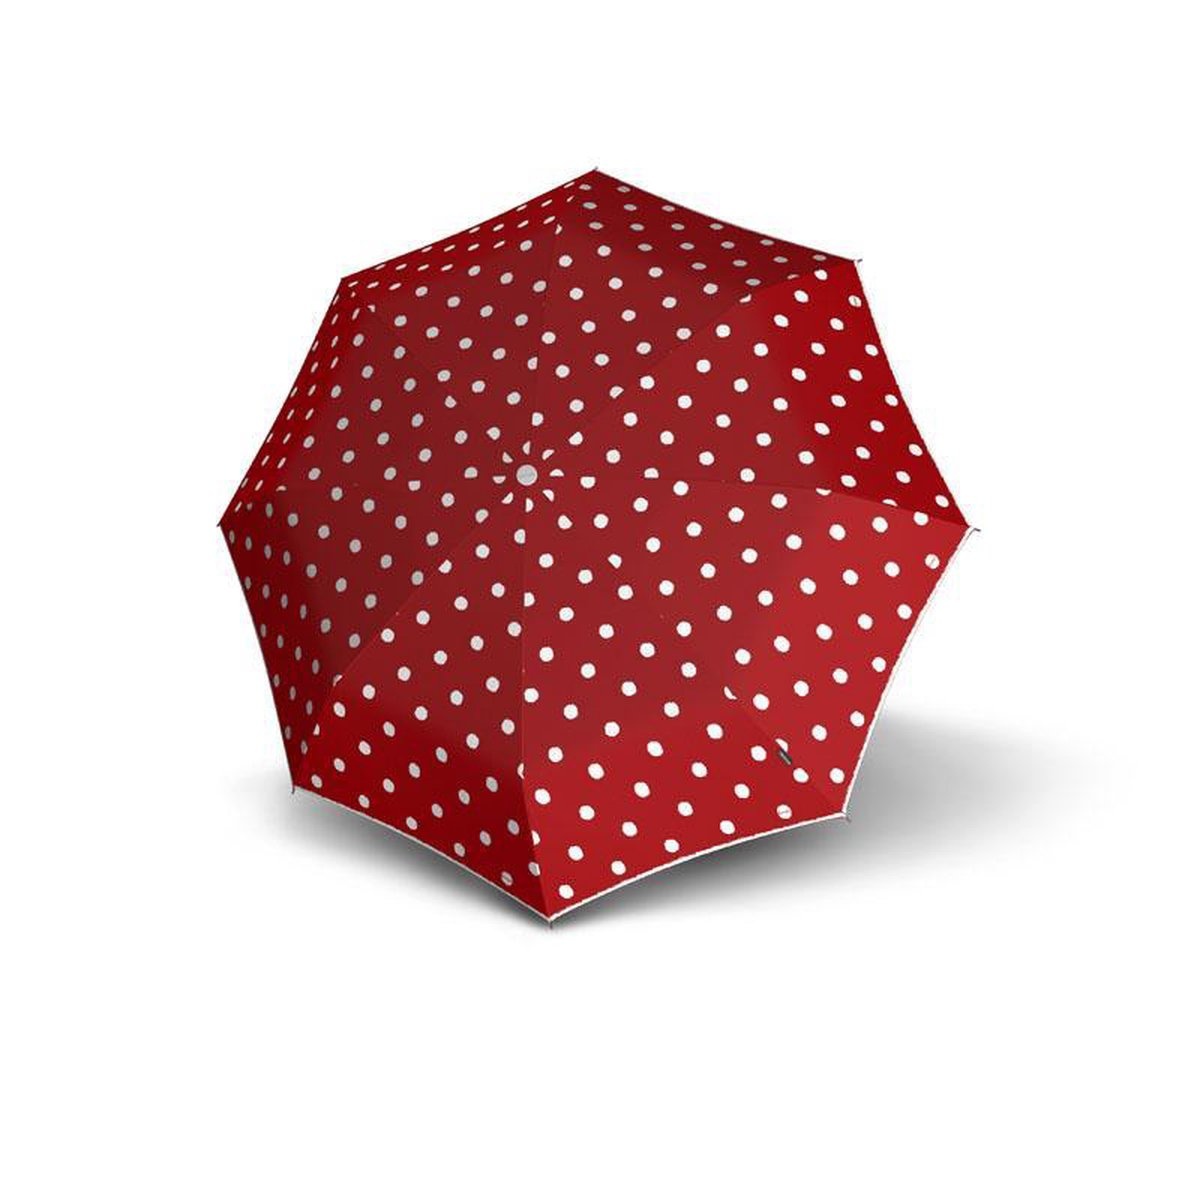 Knirps Knirps T-205 M Duomatic Windproof Paraplu - Dot Art Red